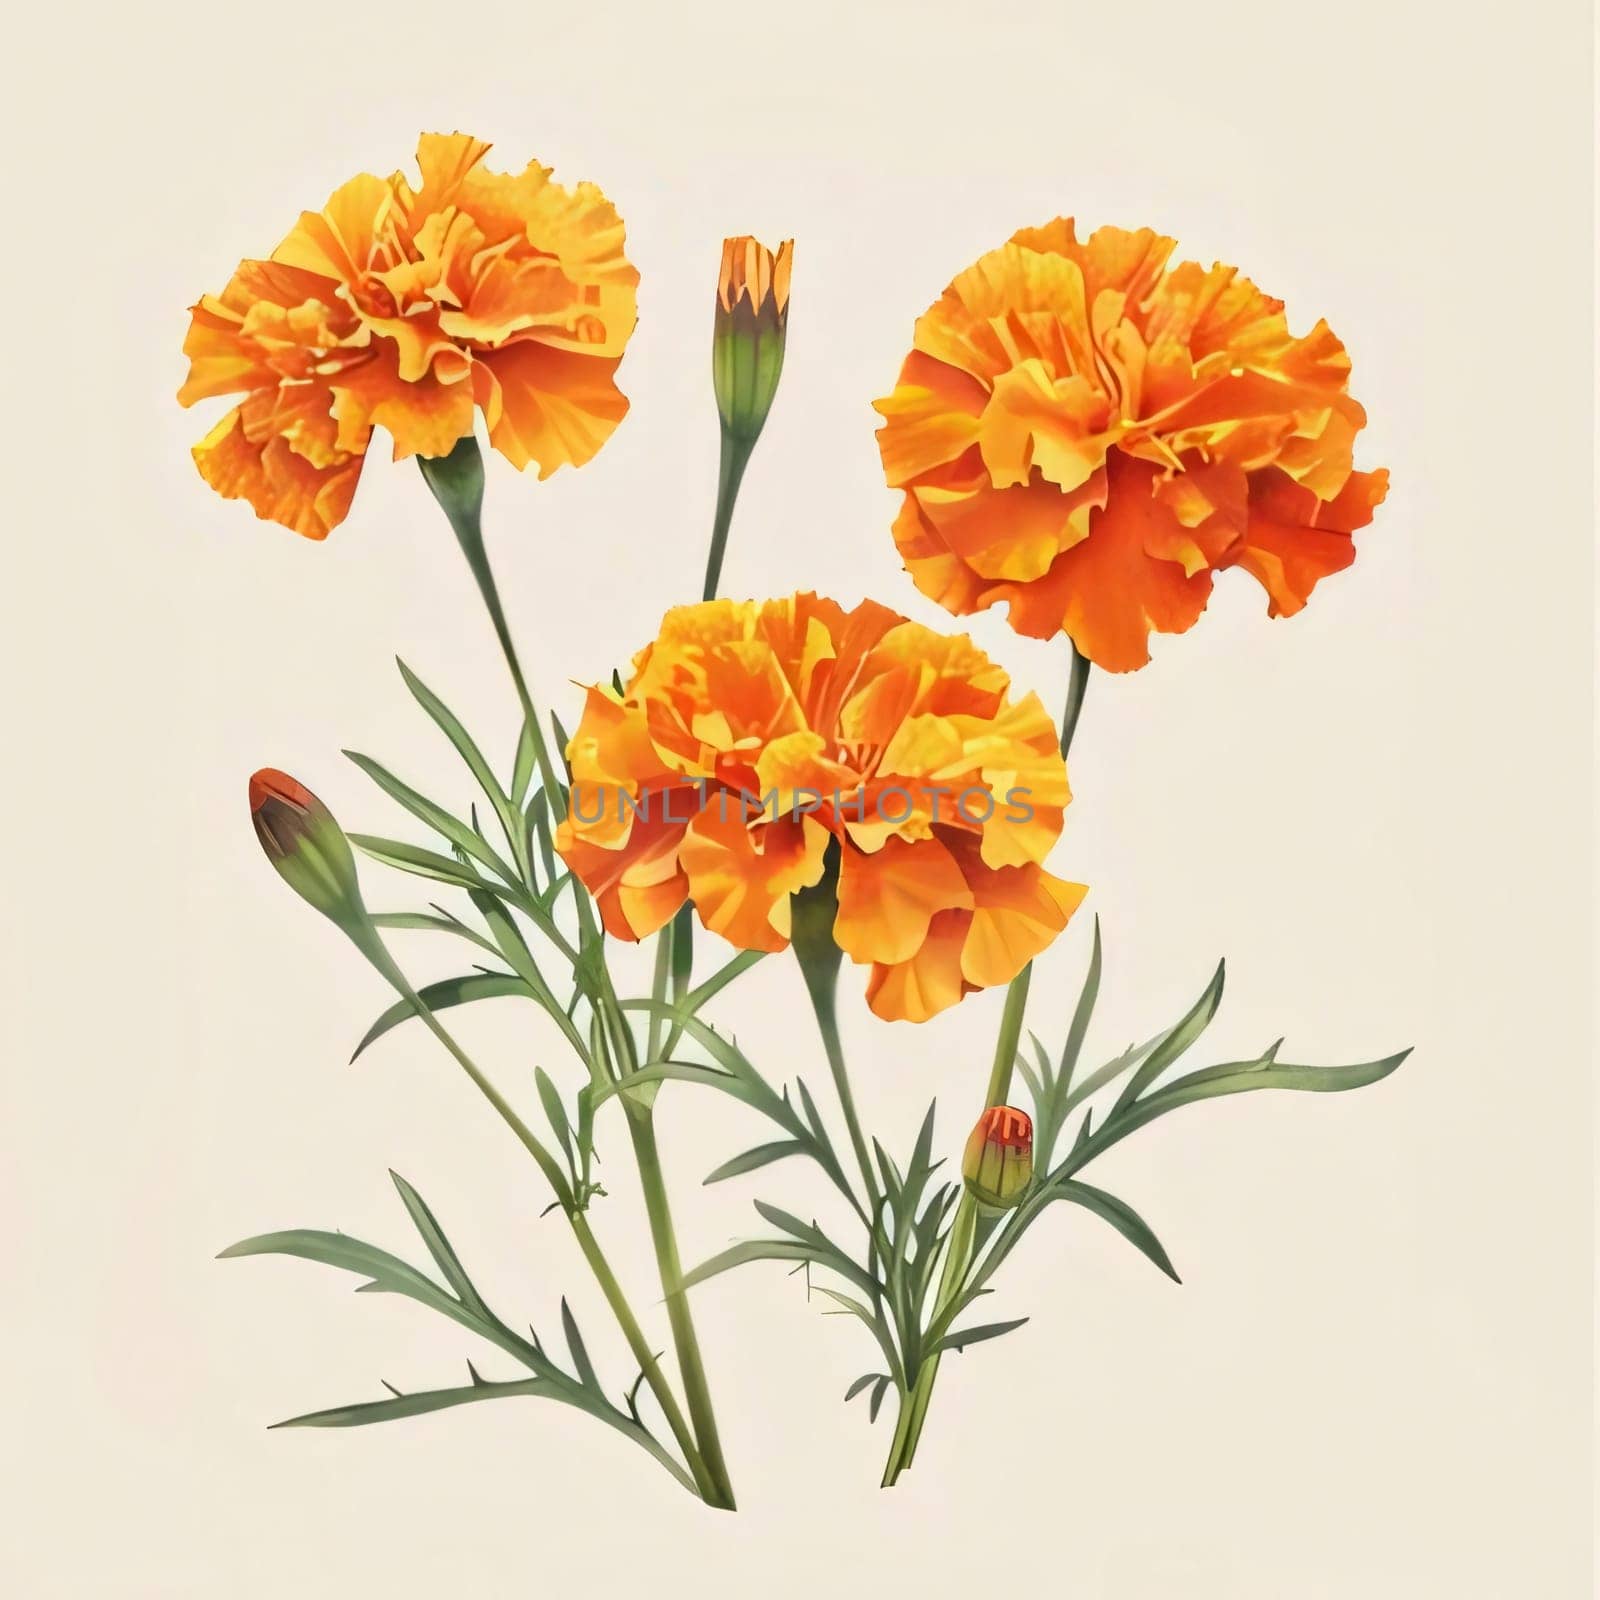 Drawn, painted flowers: orange marigold flowers with green stem and leaves. Flowering flowers, a symbol of spring, new life. by ThemesS